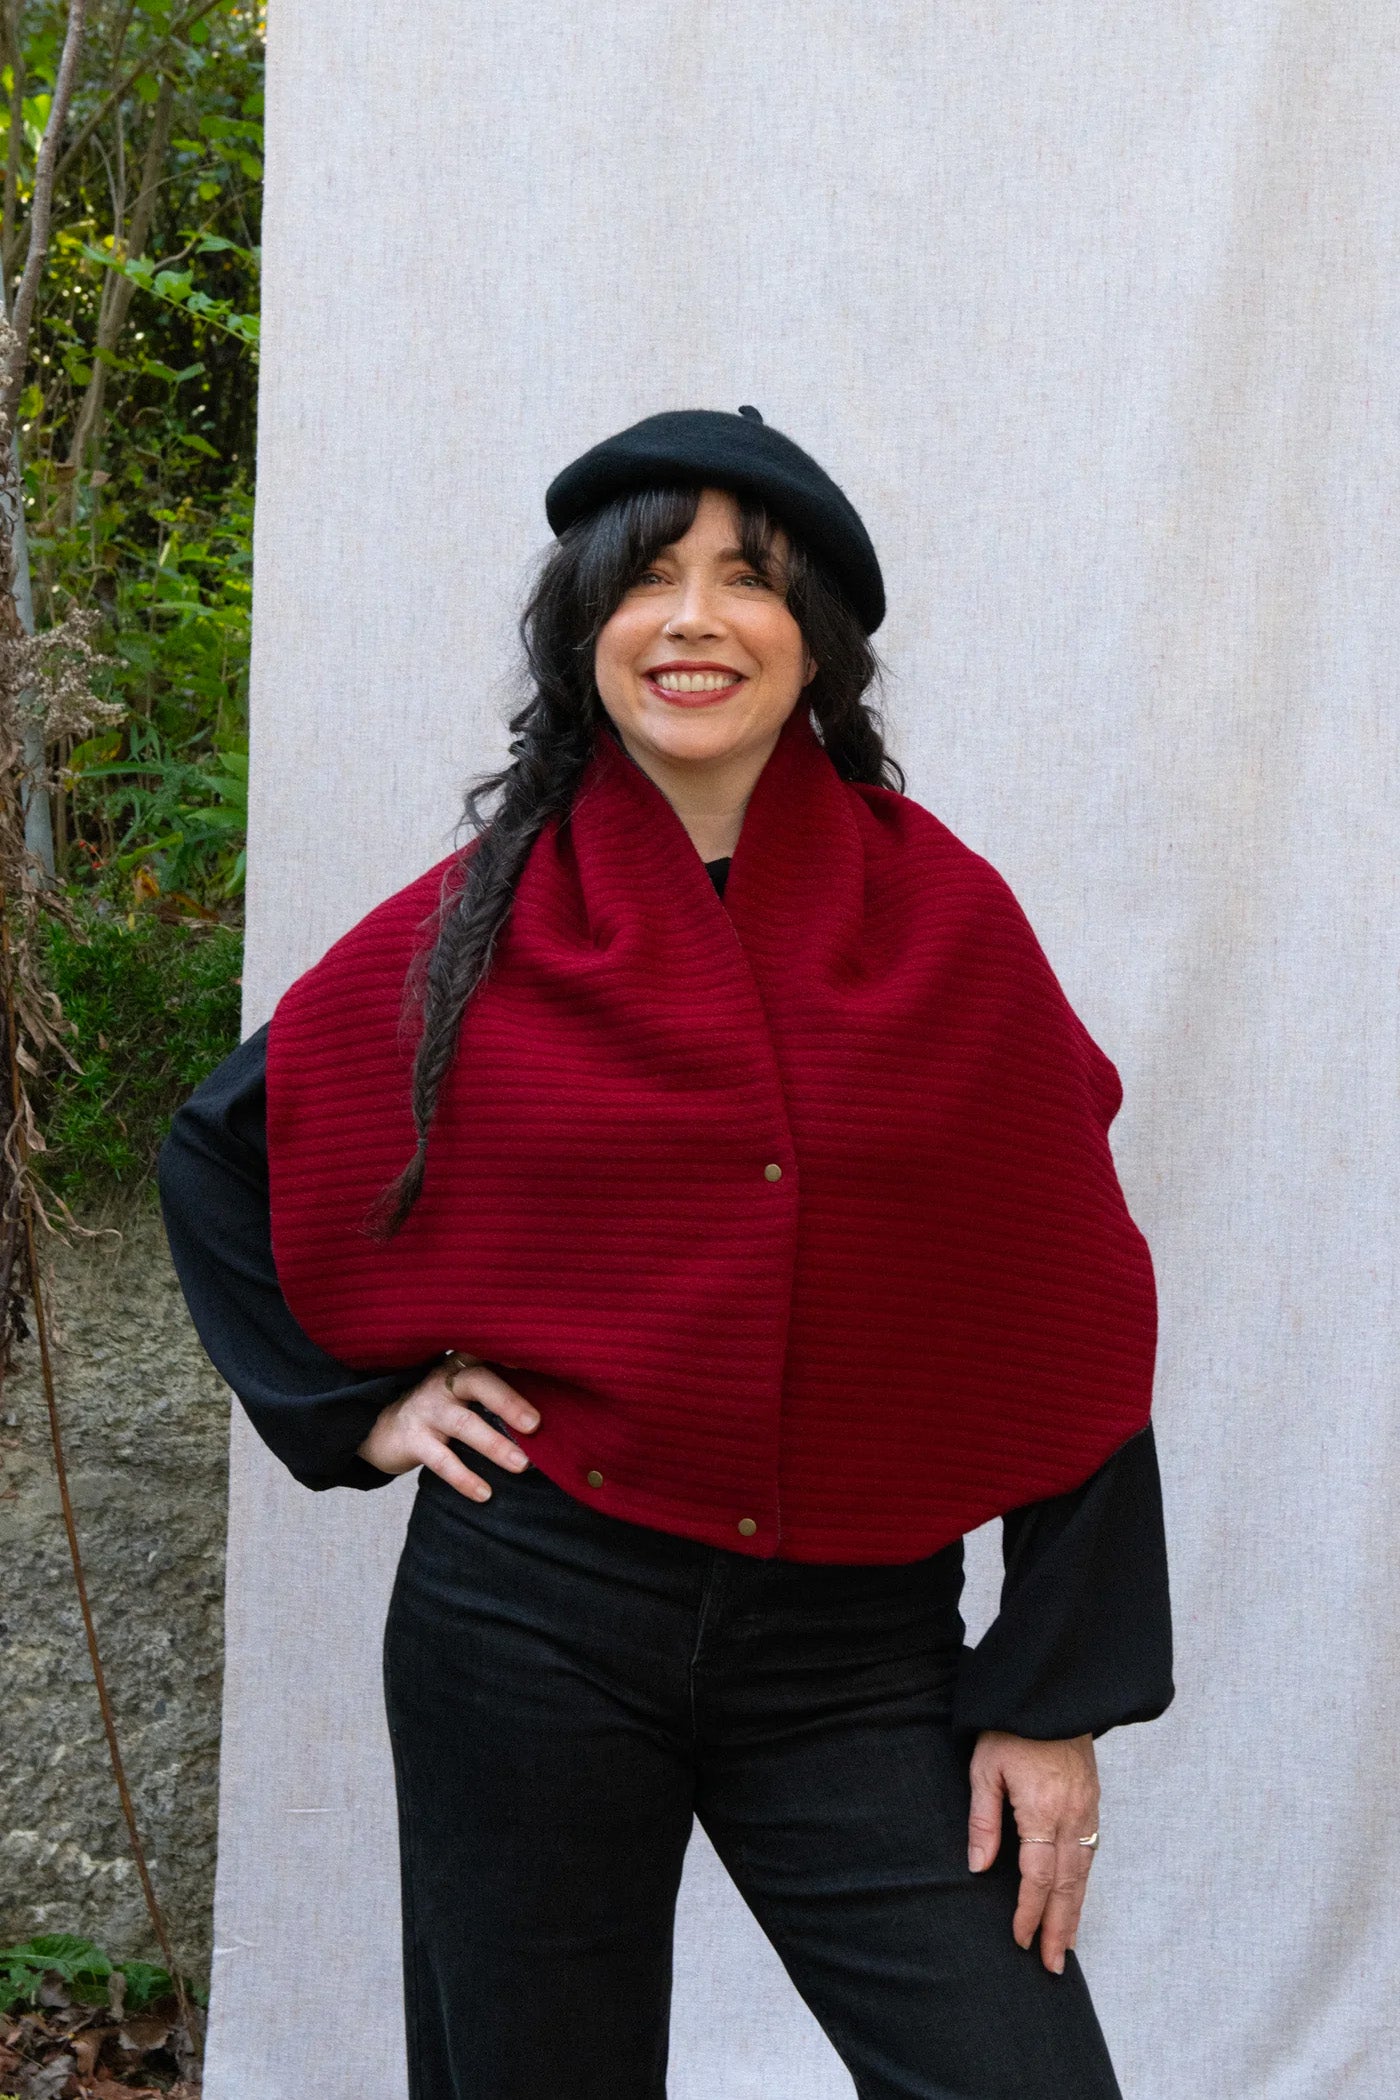 Sussex Scarf by Kazak, Red, adjustable with snaps, wool, knit lining, made in Montreal